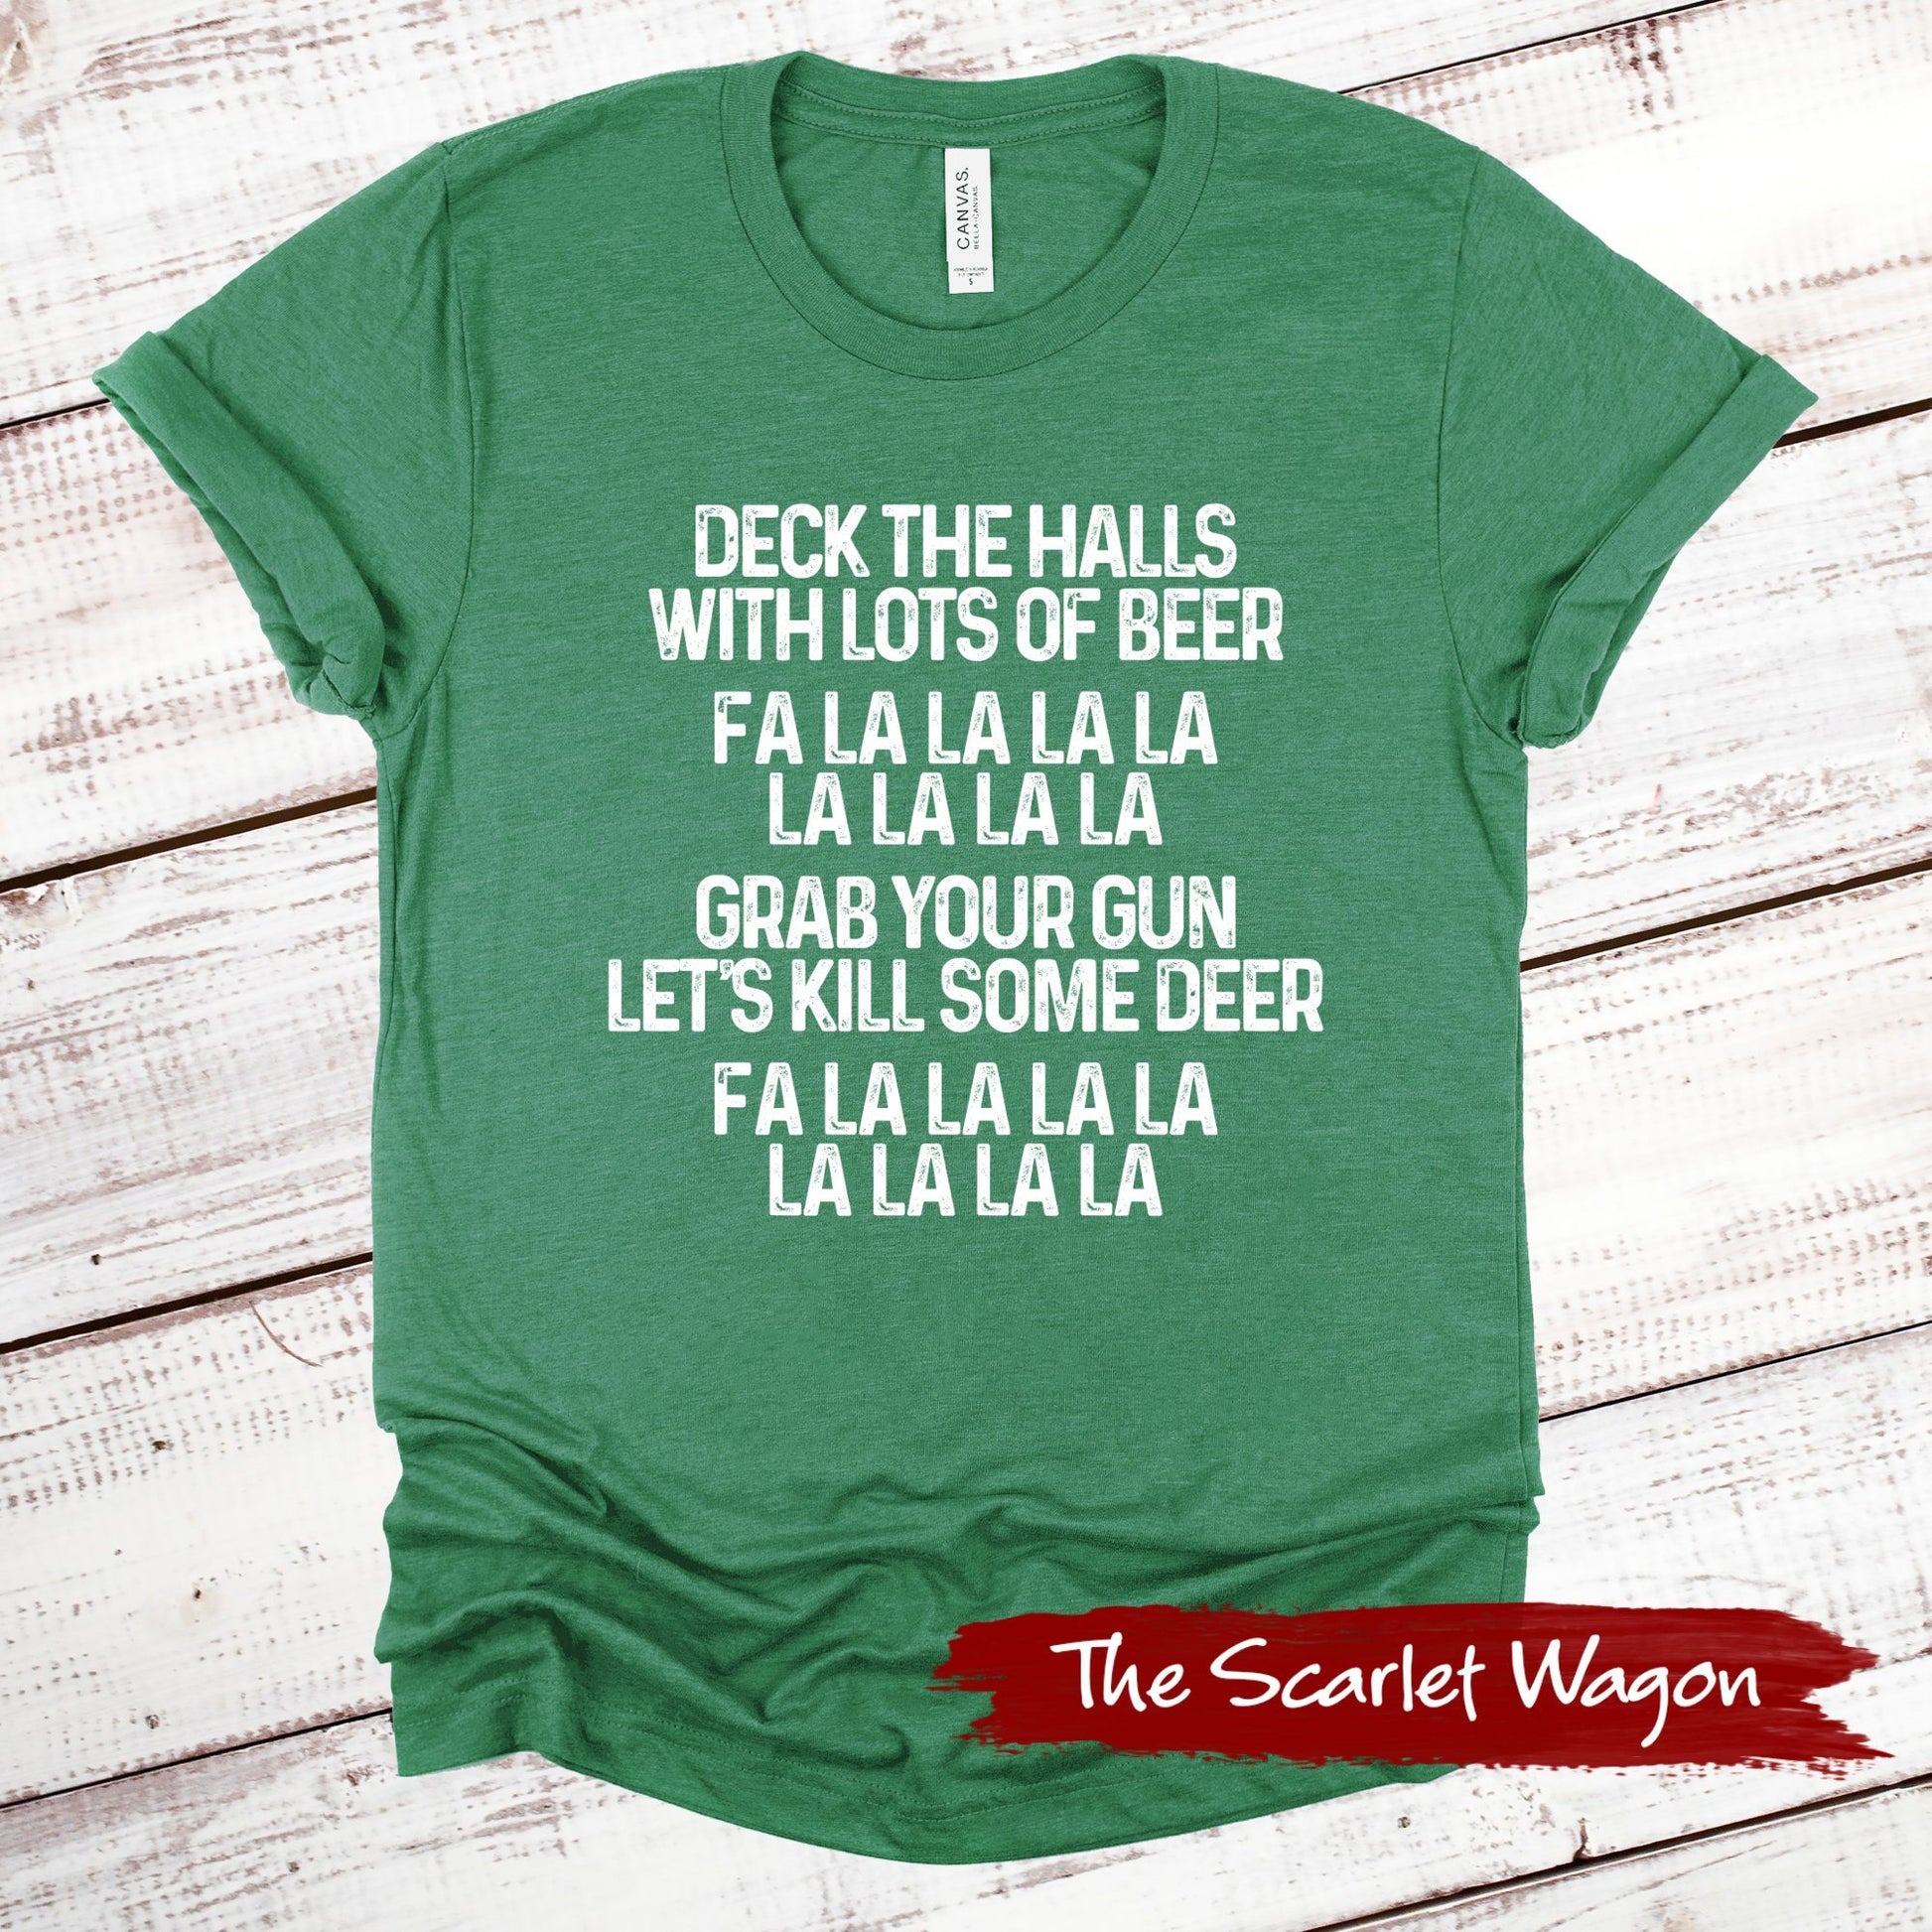 Deck the Halls with Lots of Beer Christmas Shirt Scarlet Wagon Heather Green XS 